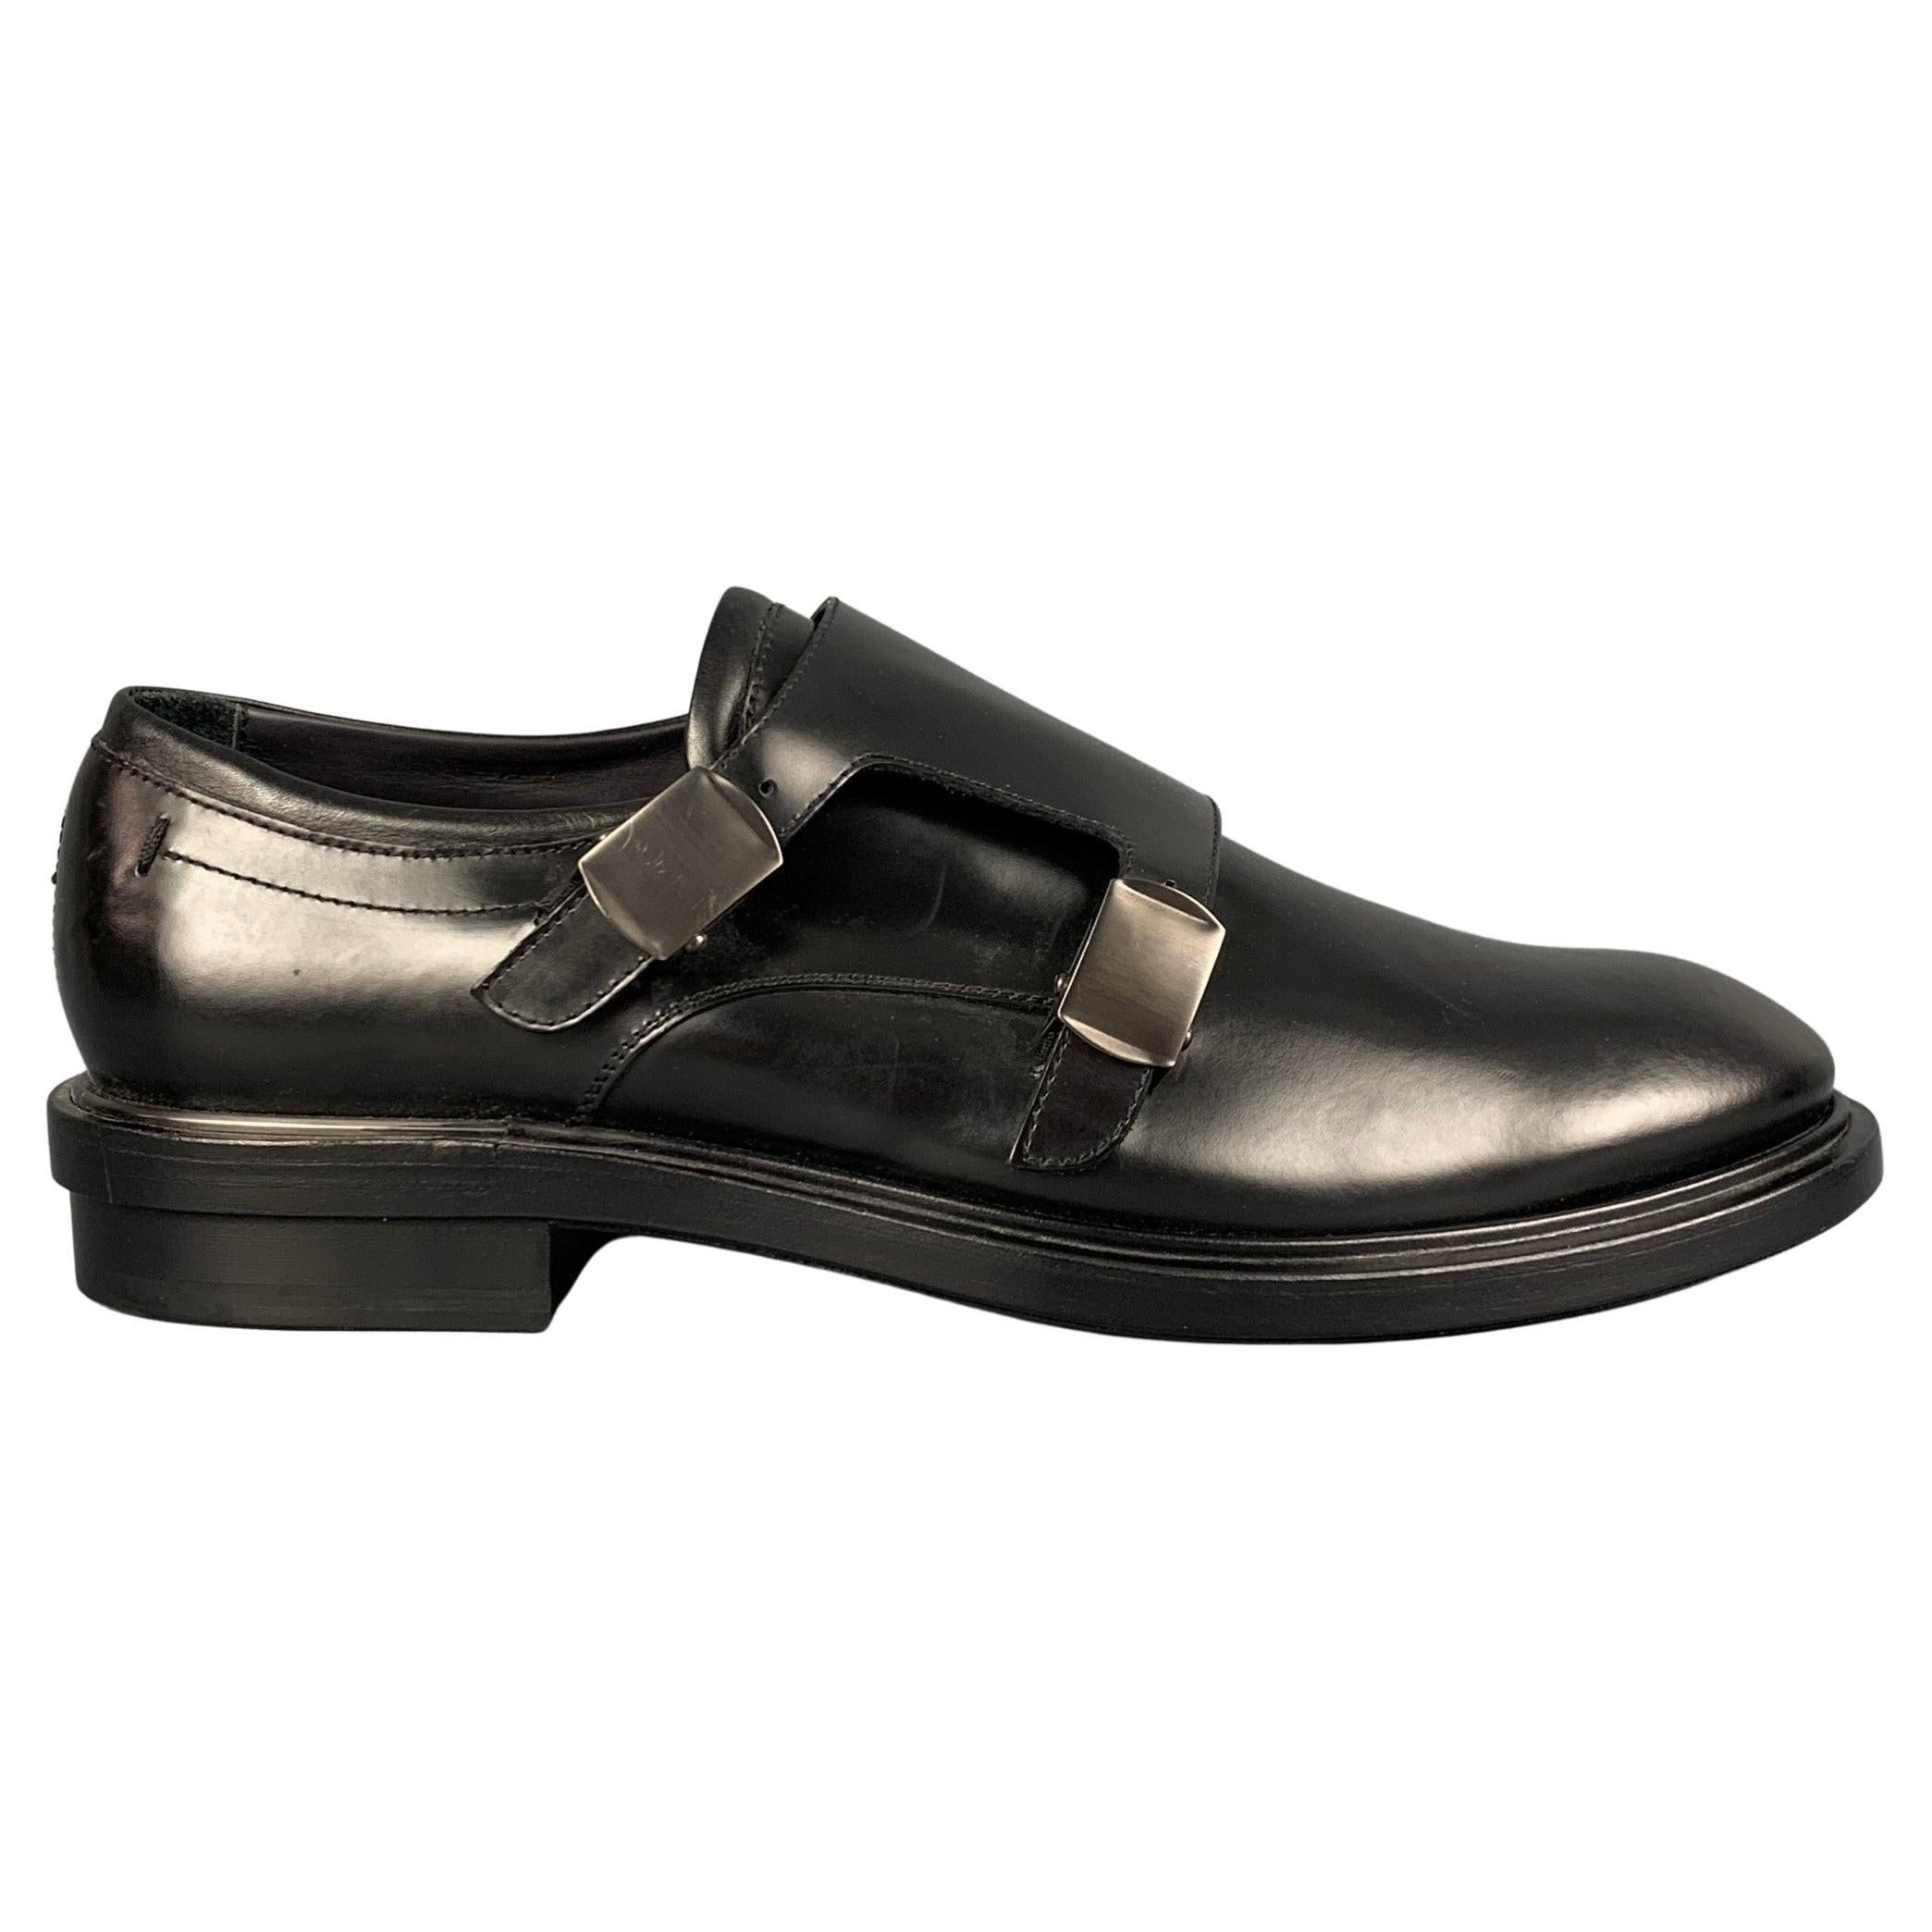 CALVIN KLEIN COLLECTION Size 9 Black Leather Double Monk Strap Loafers